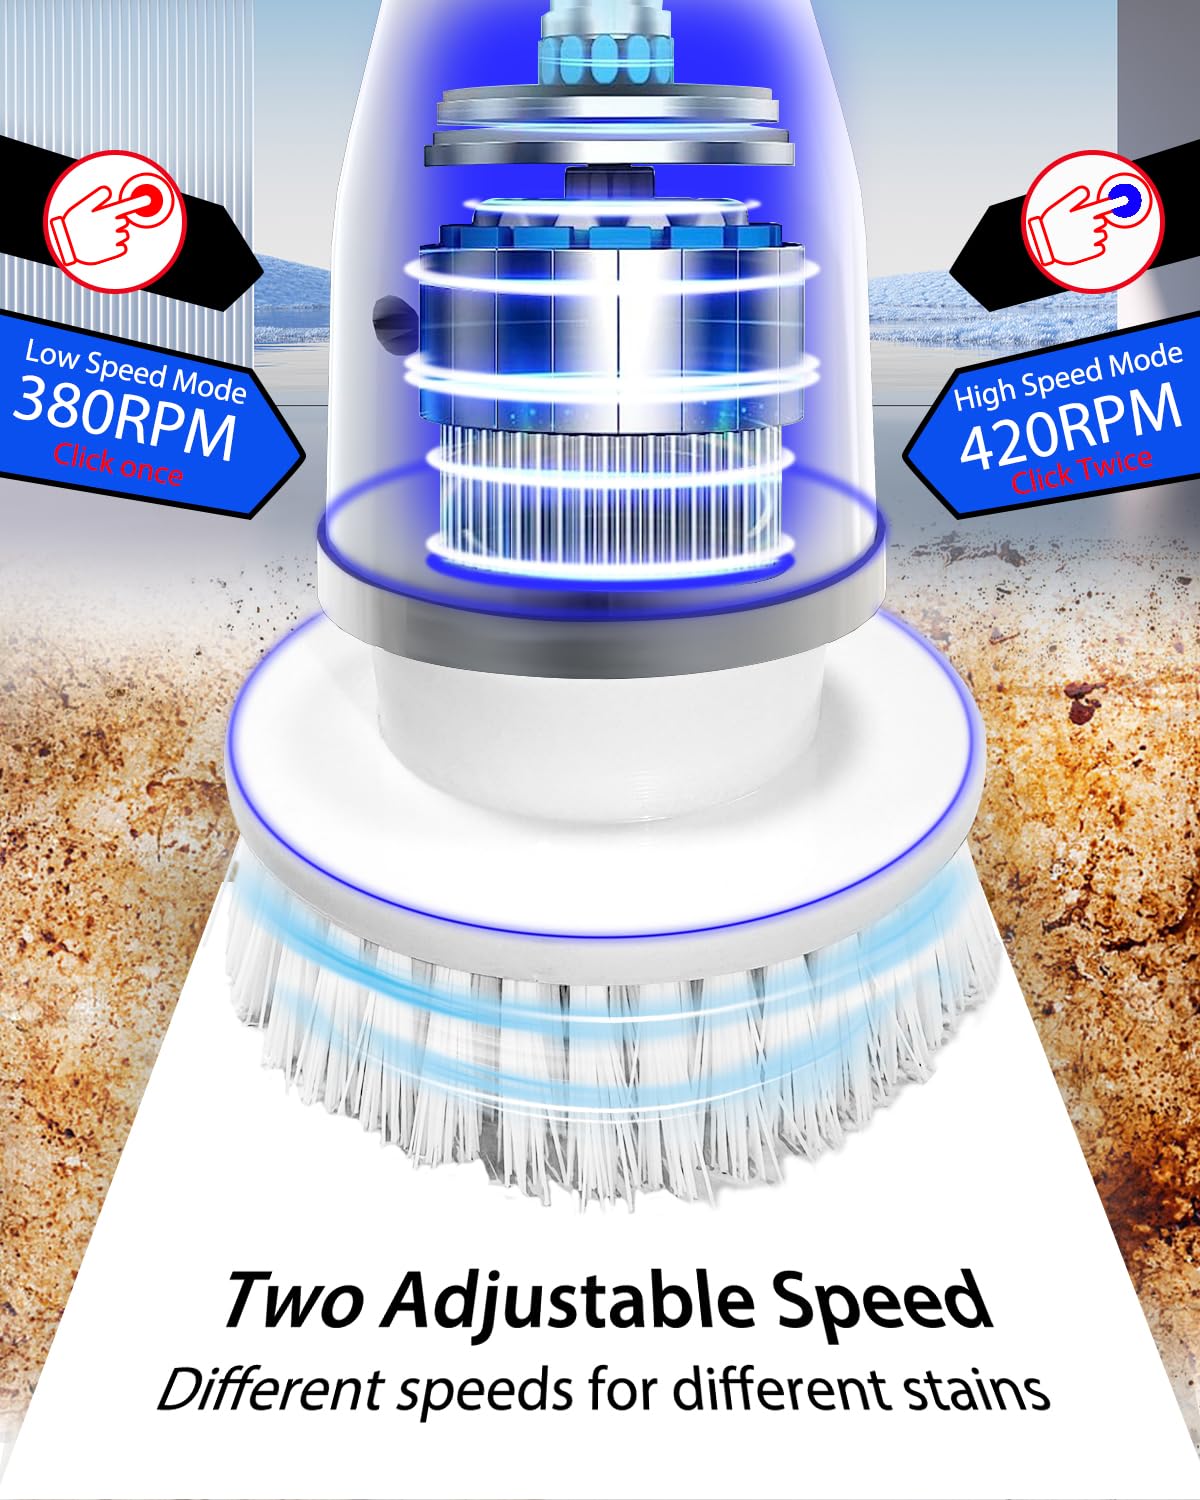 UBeesize Electric Spin Scrubber,Cordless Cleaning Brush,Rotatable Shower Scrubber with 8 Replaceable Heads,Adjustable Detachable Handle Bathroom Scrubber for Bathtub,Tile,Floor and Car Cleaning